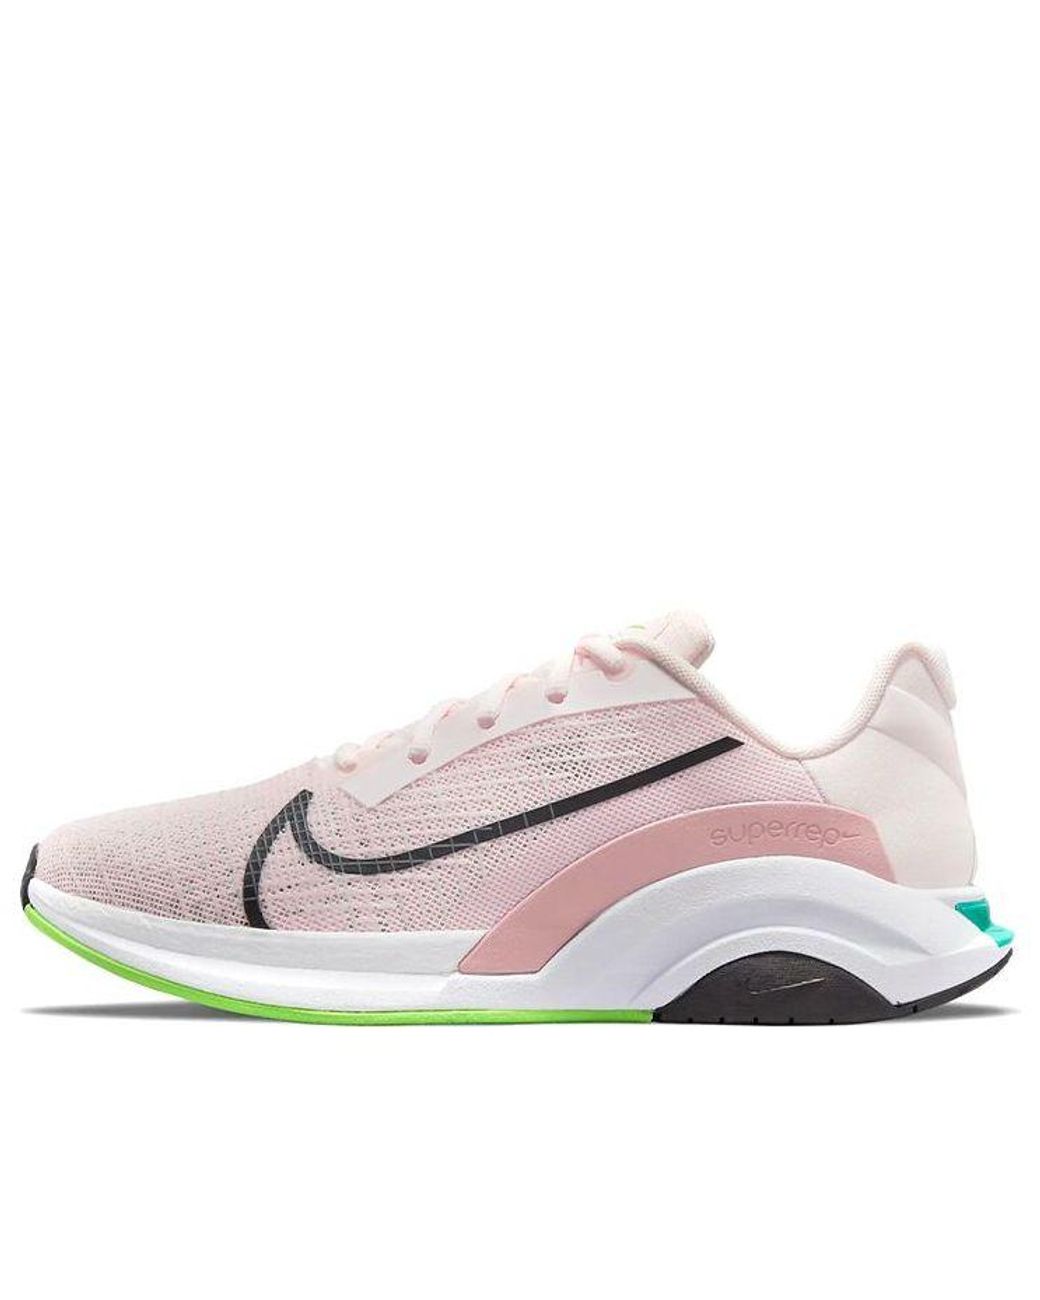 diario Enviar cayó Nike Zoomx Superrep Surge Low-top Running Shoes Pink in White | Lyst